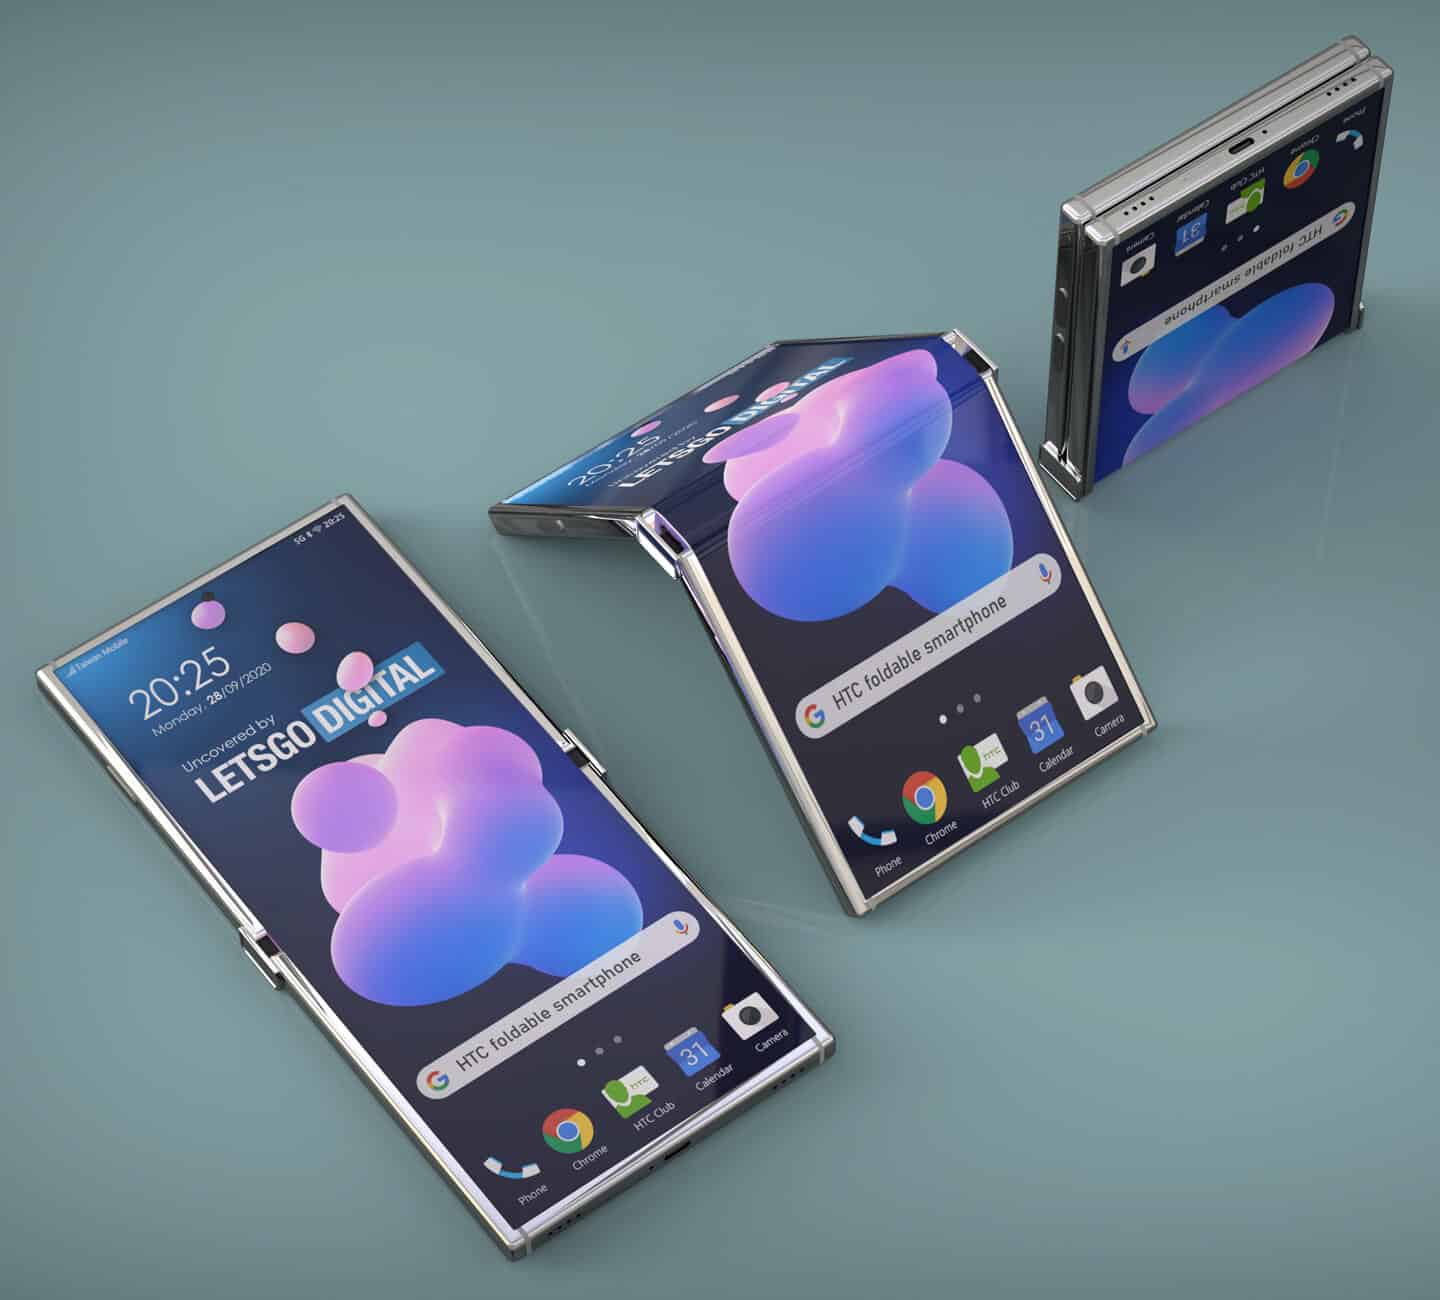 HTC’s folding smartphone appears to be the worst of both worlds